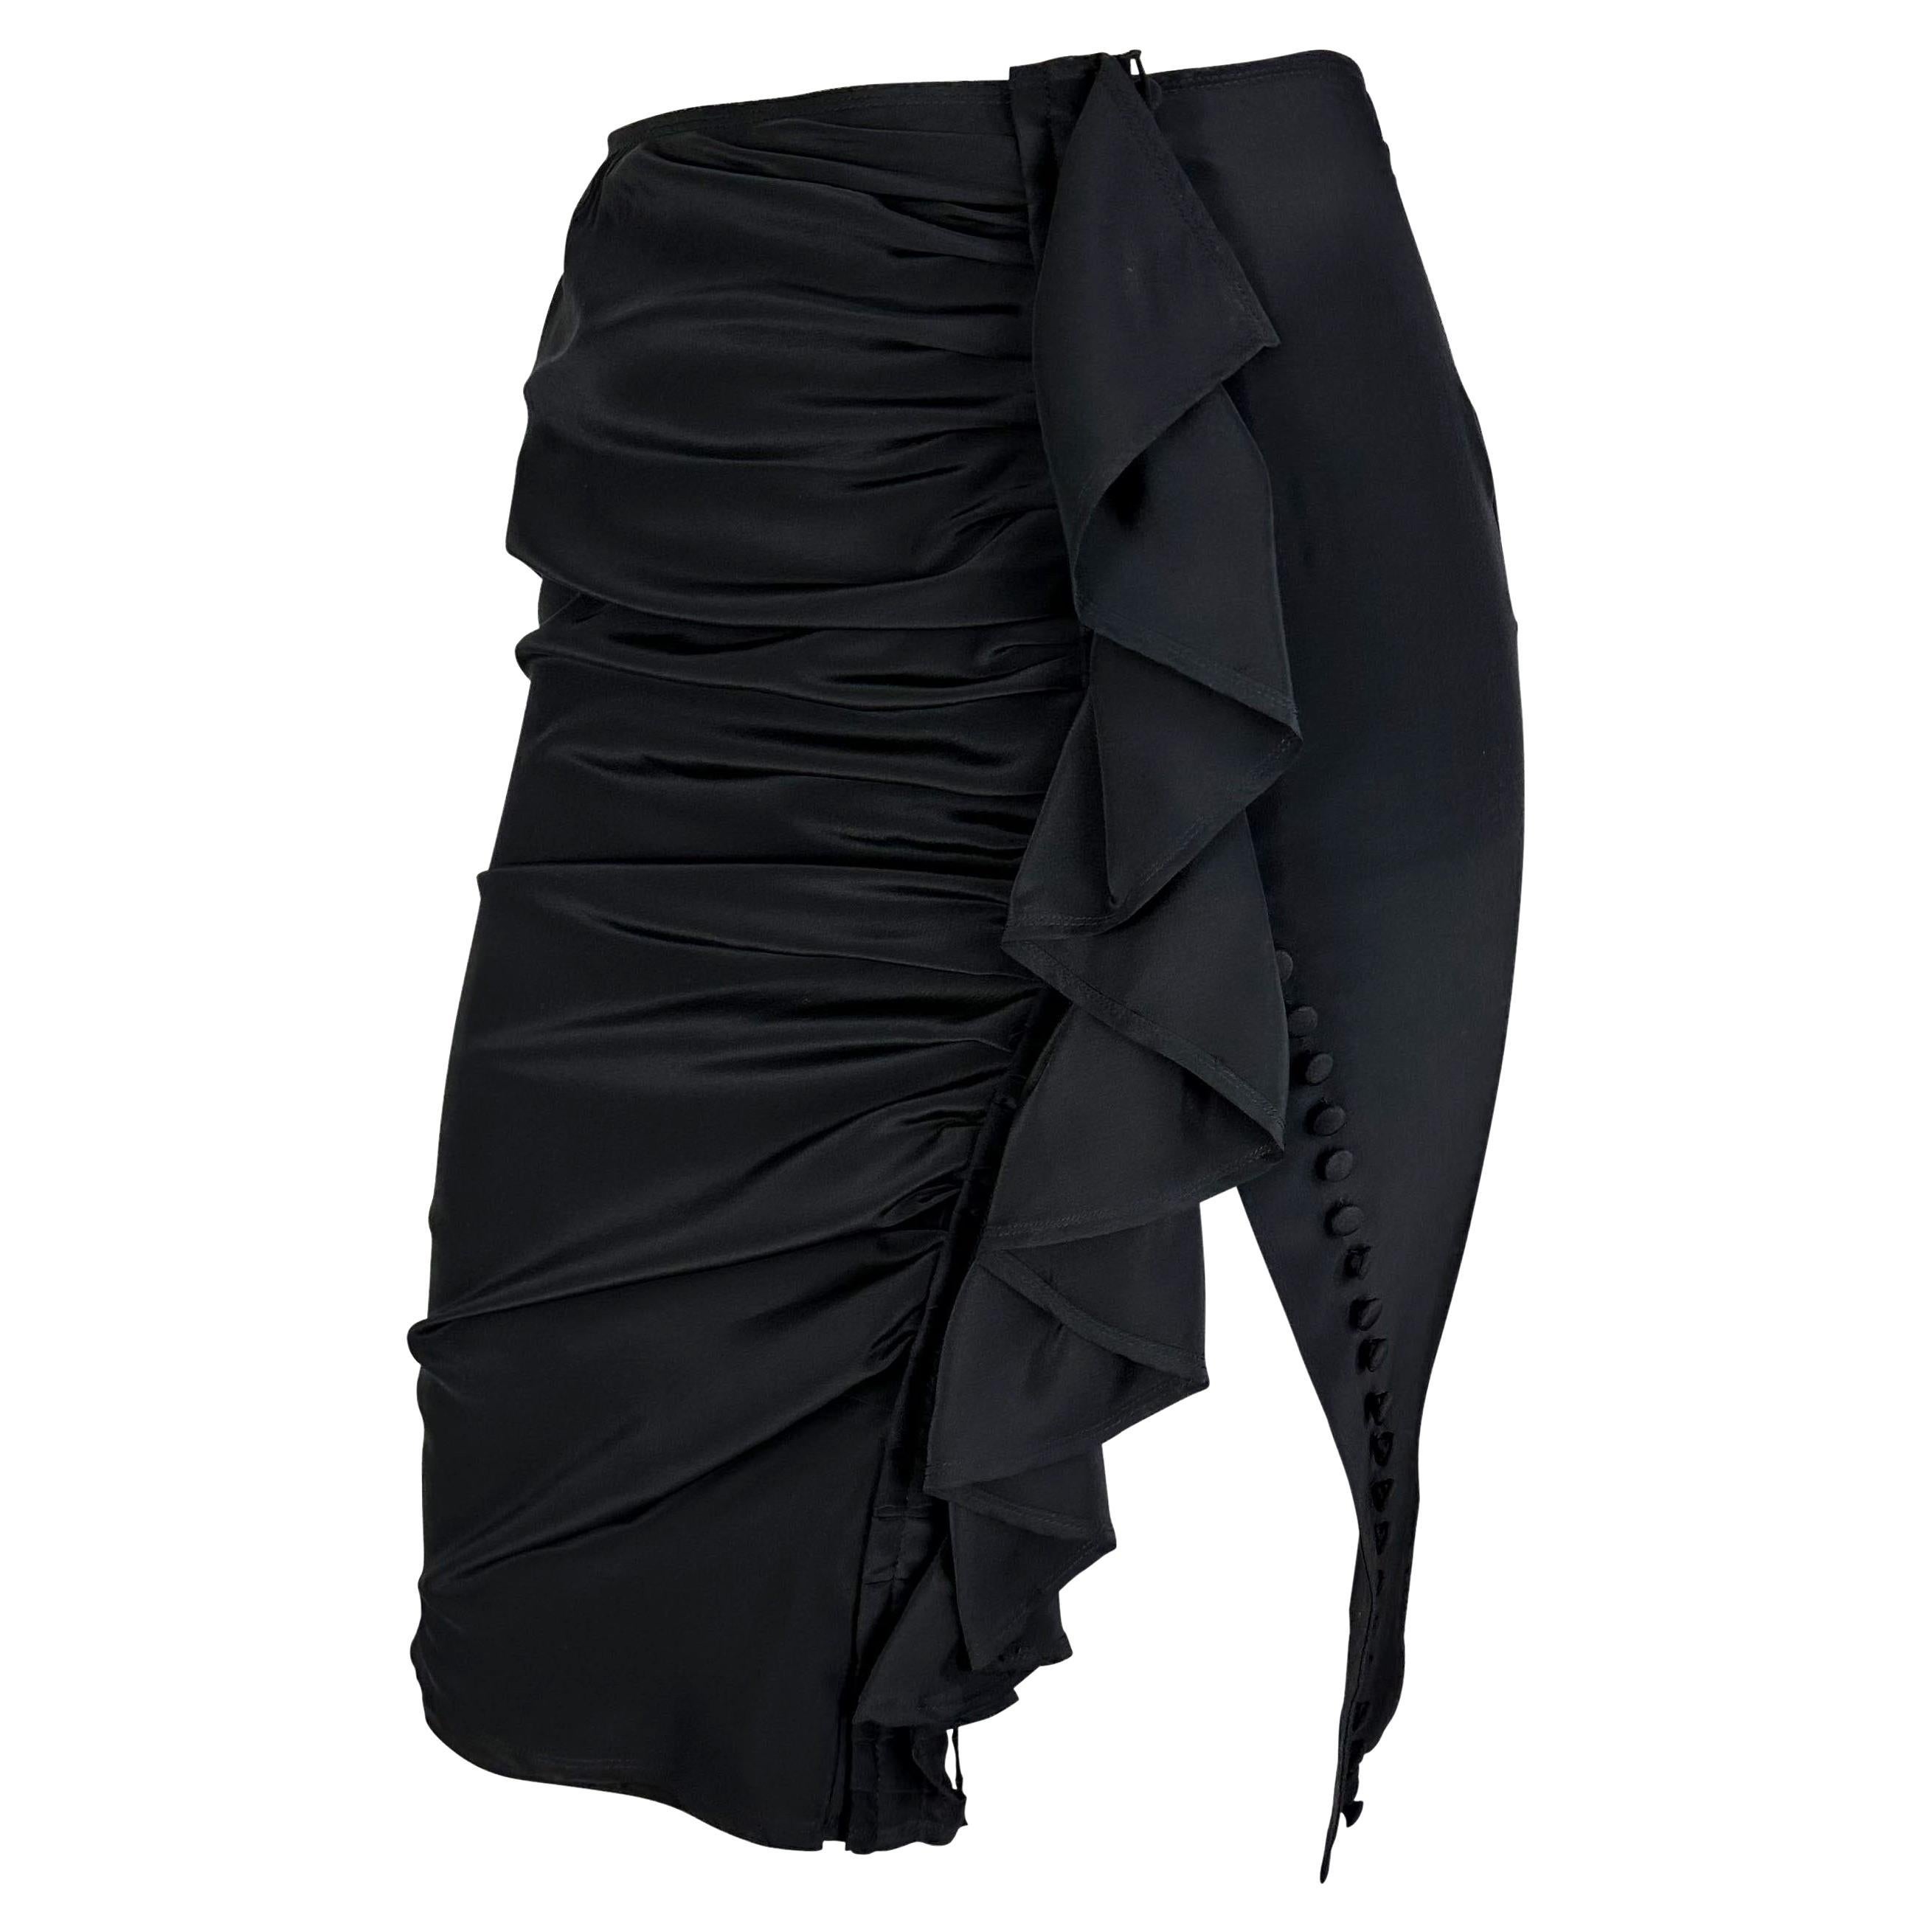 Presenting an incredible black silk Yves Saint Laurent Rive Gauche skirt, designed by Tom Ford. From the early 2000s, this skirt features ruching at the front, a vertical ruffle detail, and a top to bottom button closure. Add this fabulous and